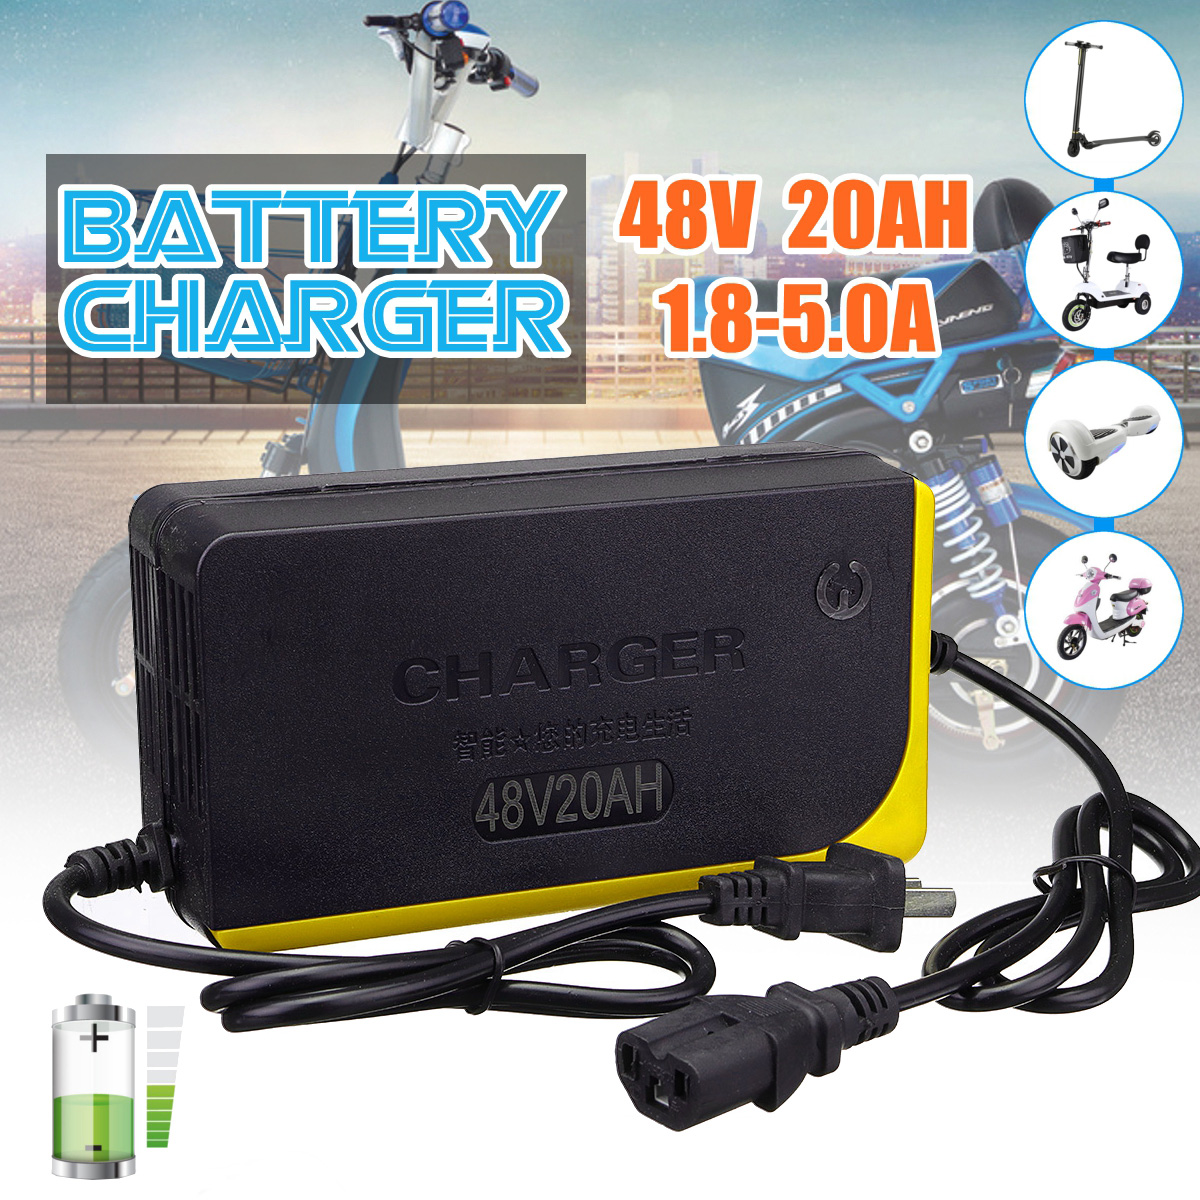 48V-20AH-18-50A-Electric-Bike-Scooter-Lead-Acid-Battery-Charger-Power-Adapter-1670779-2